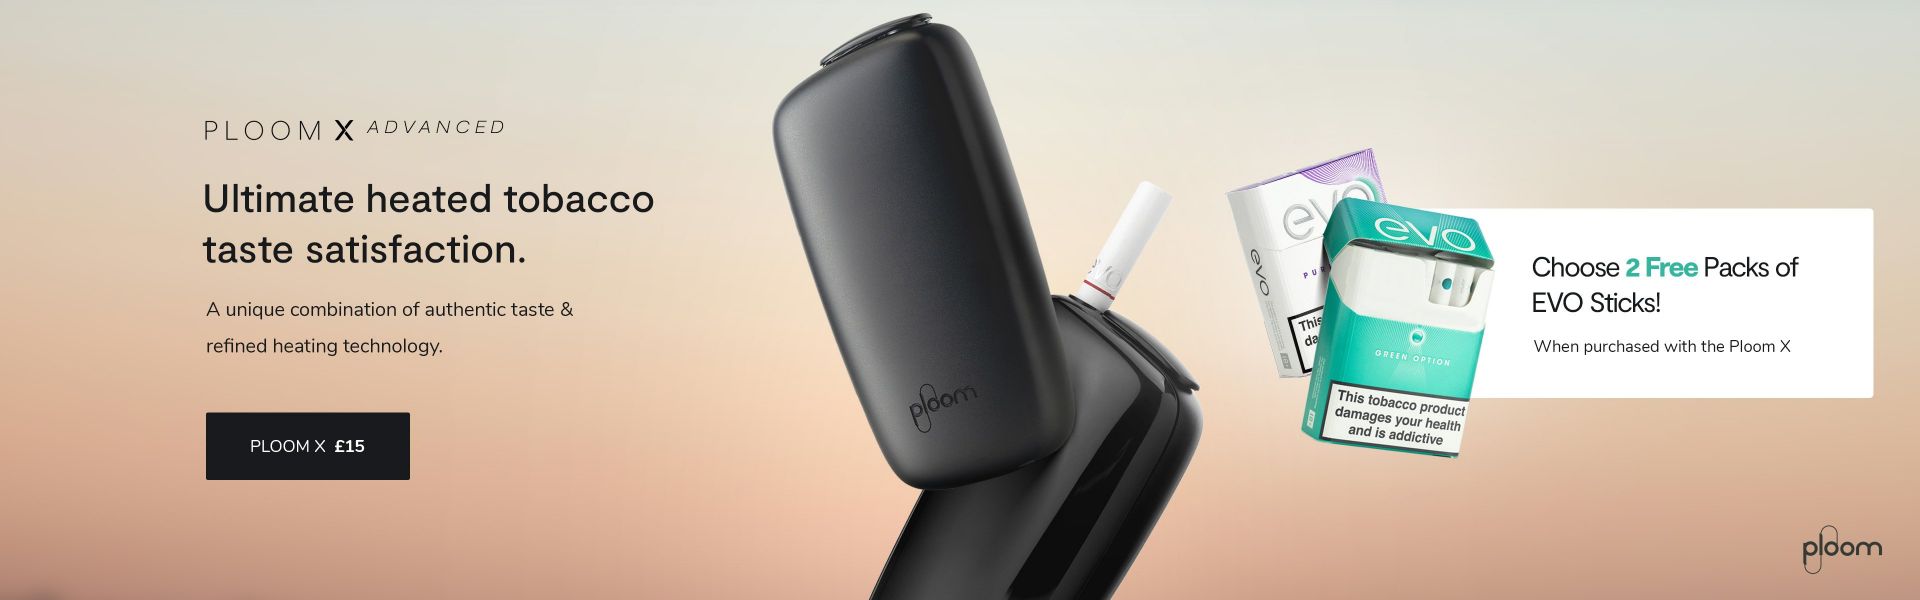 Ploom X | Two Free Packs of Evo when purchased with Ploom X Device